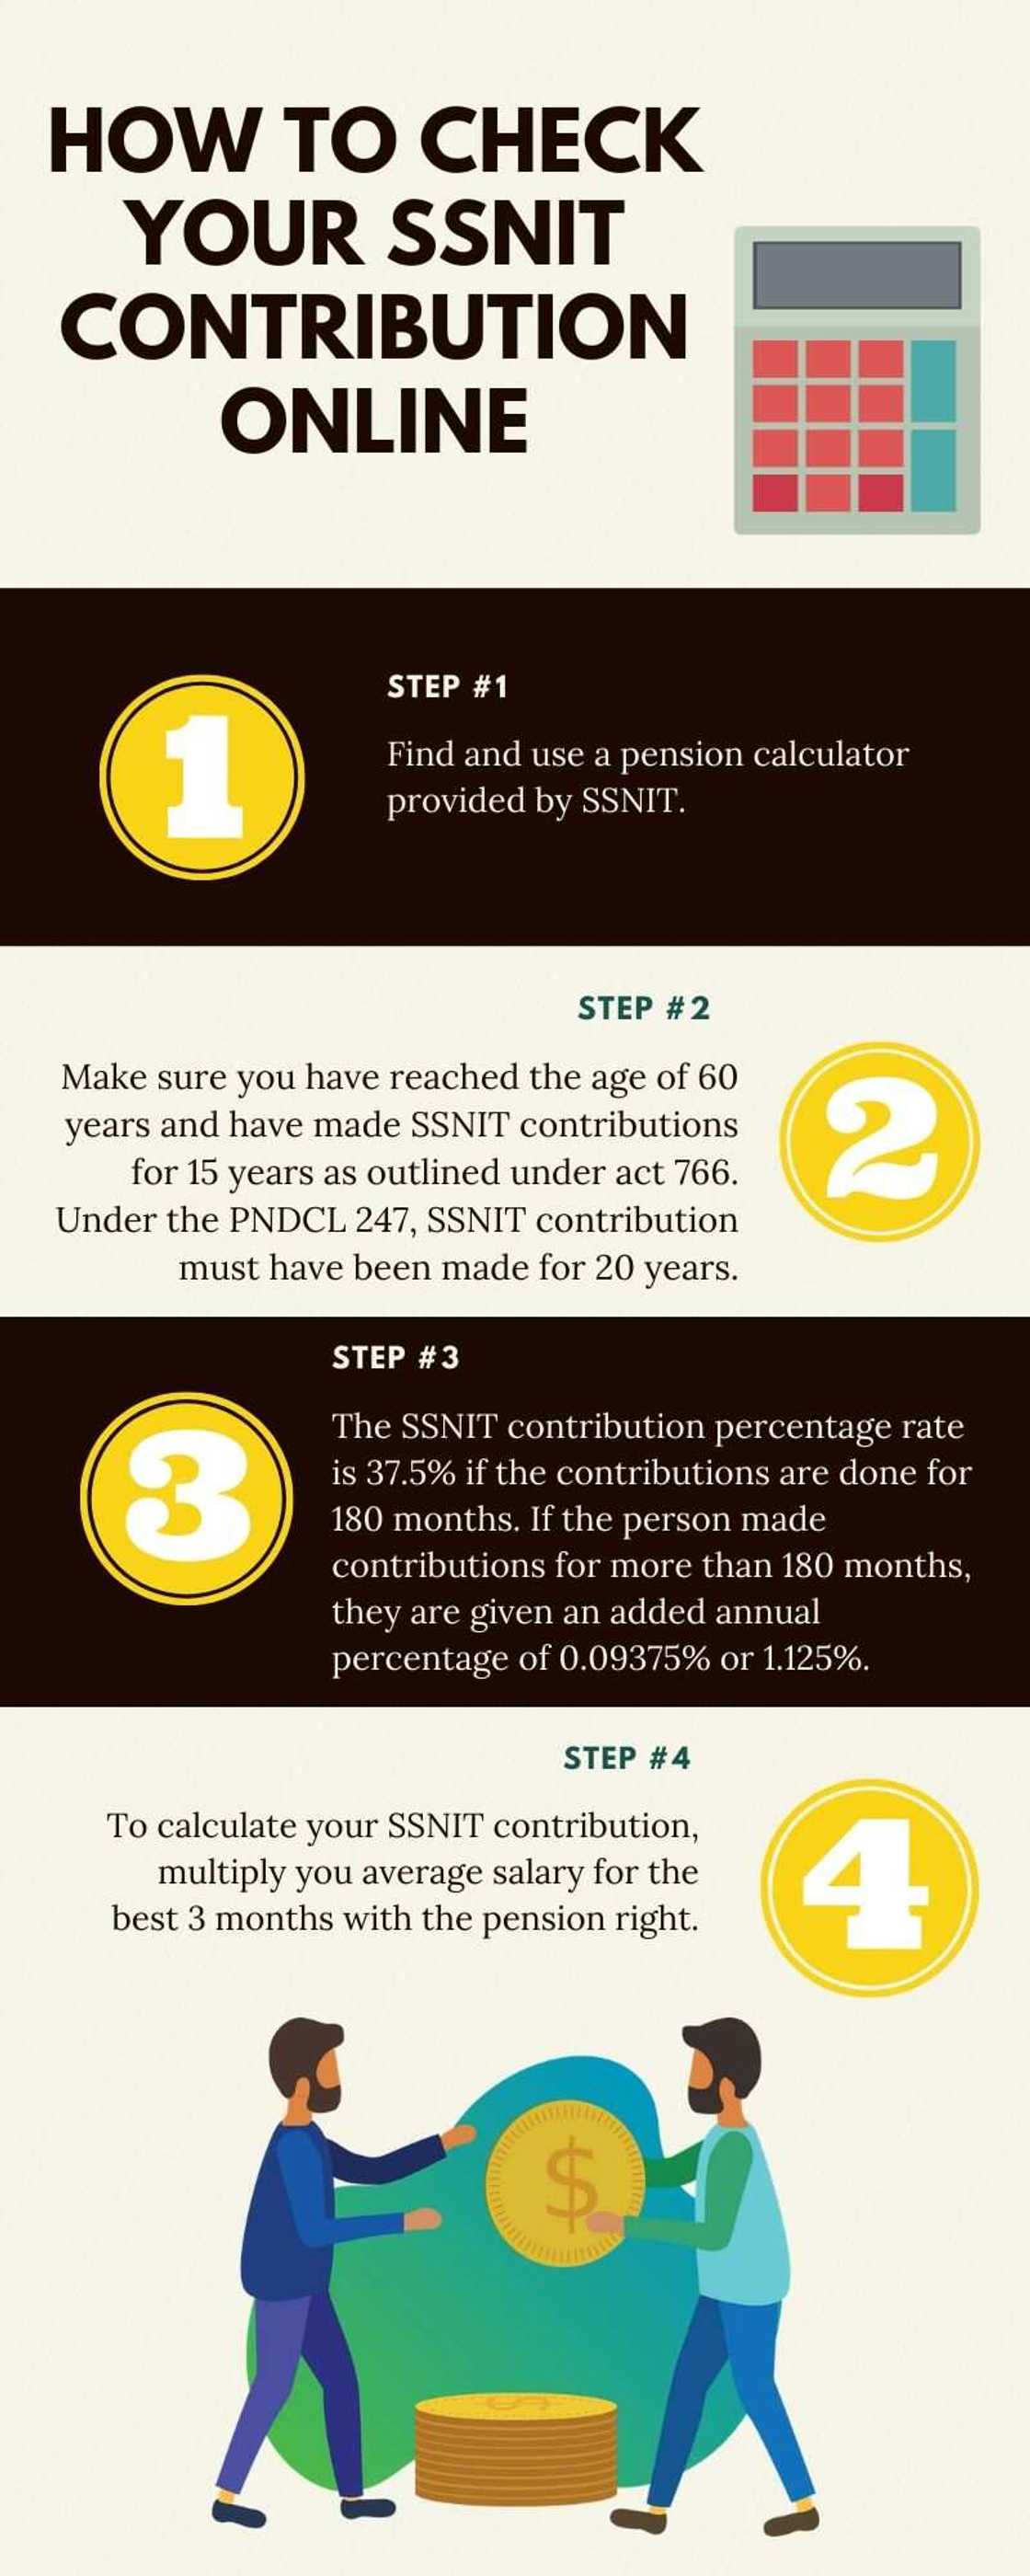 How to check your SSNIT contribution